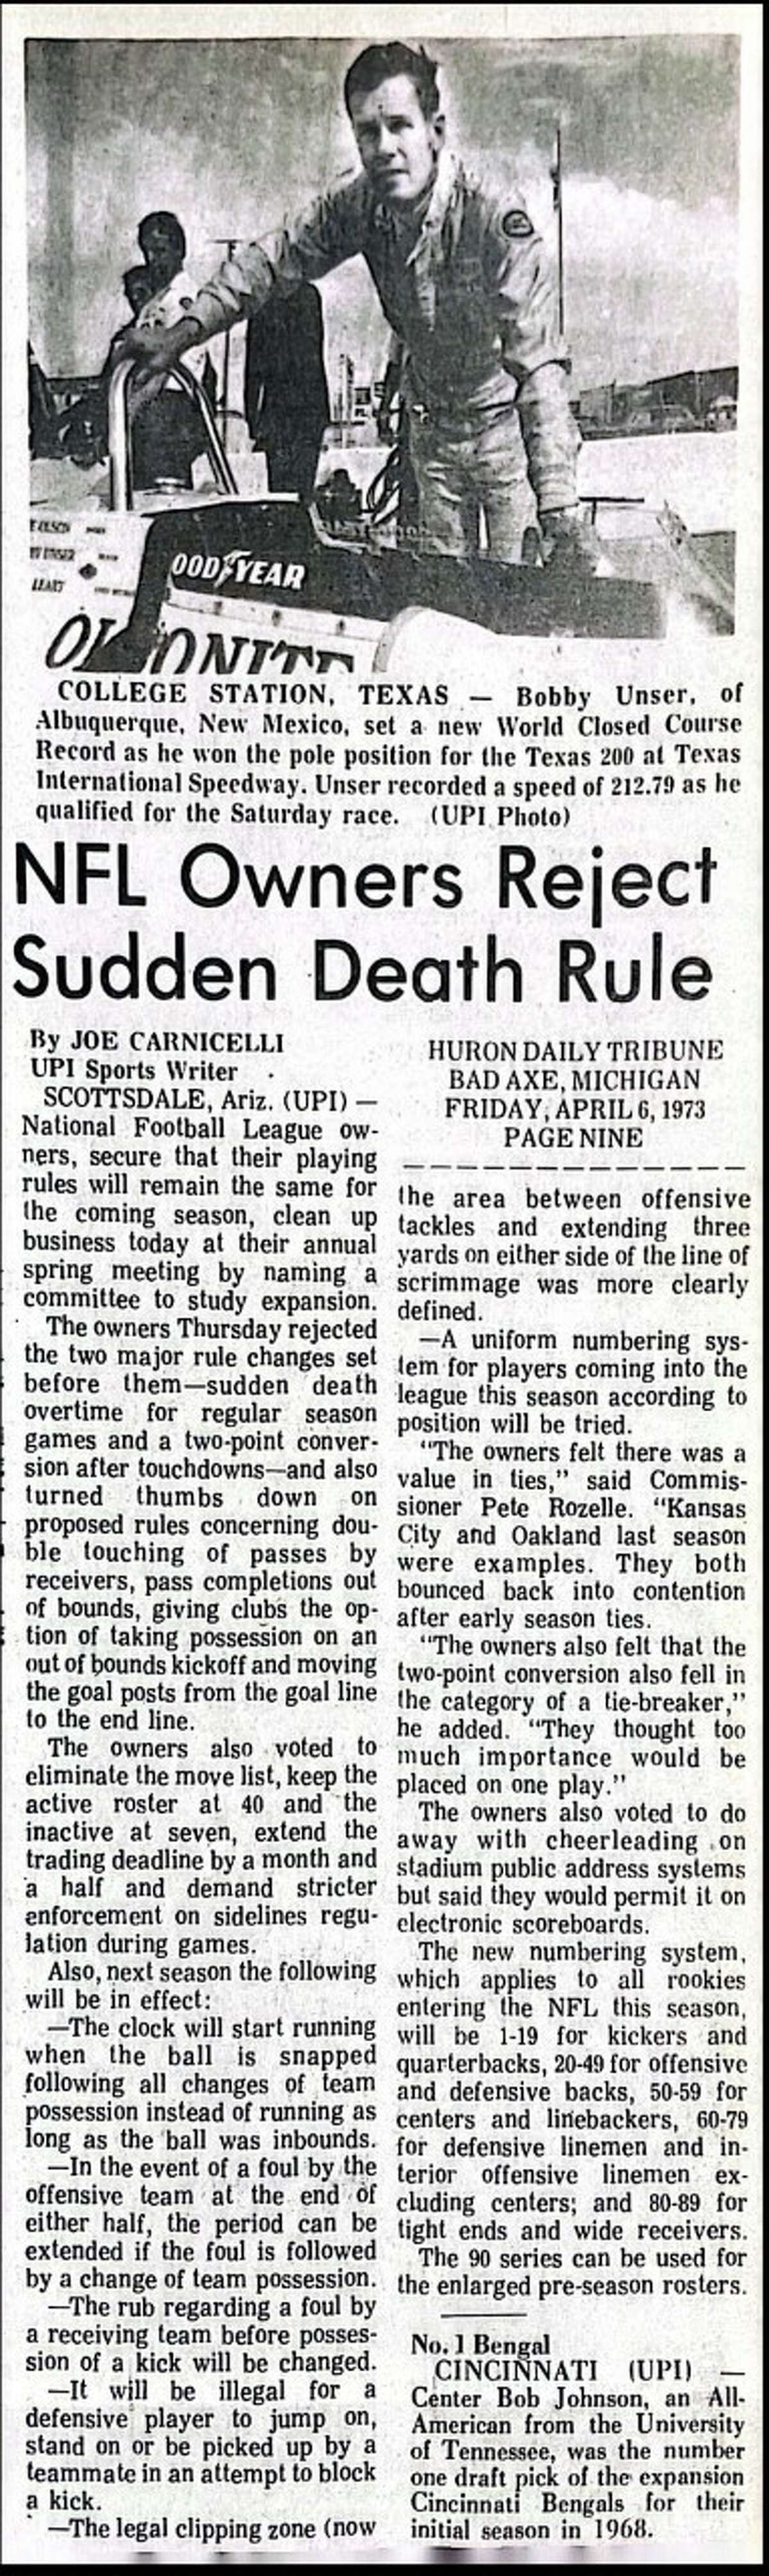 NFL owners rejected a "Sudden Death" overtime rule in spring 1973. Imagine had they accepted the rule, what the league would look like today.